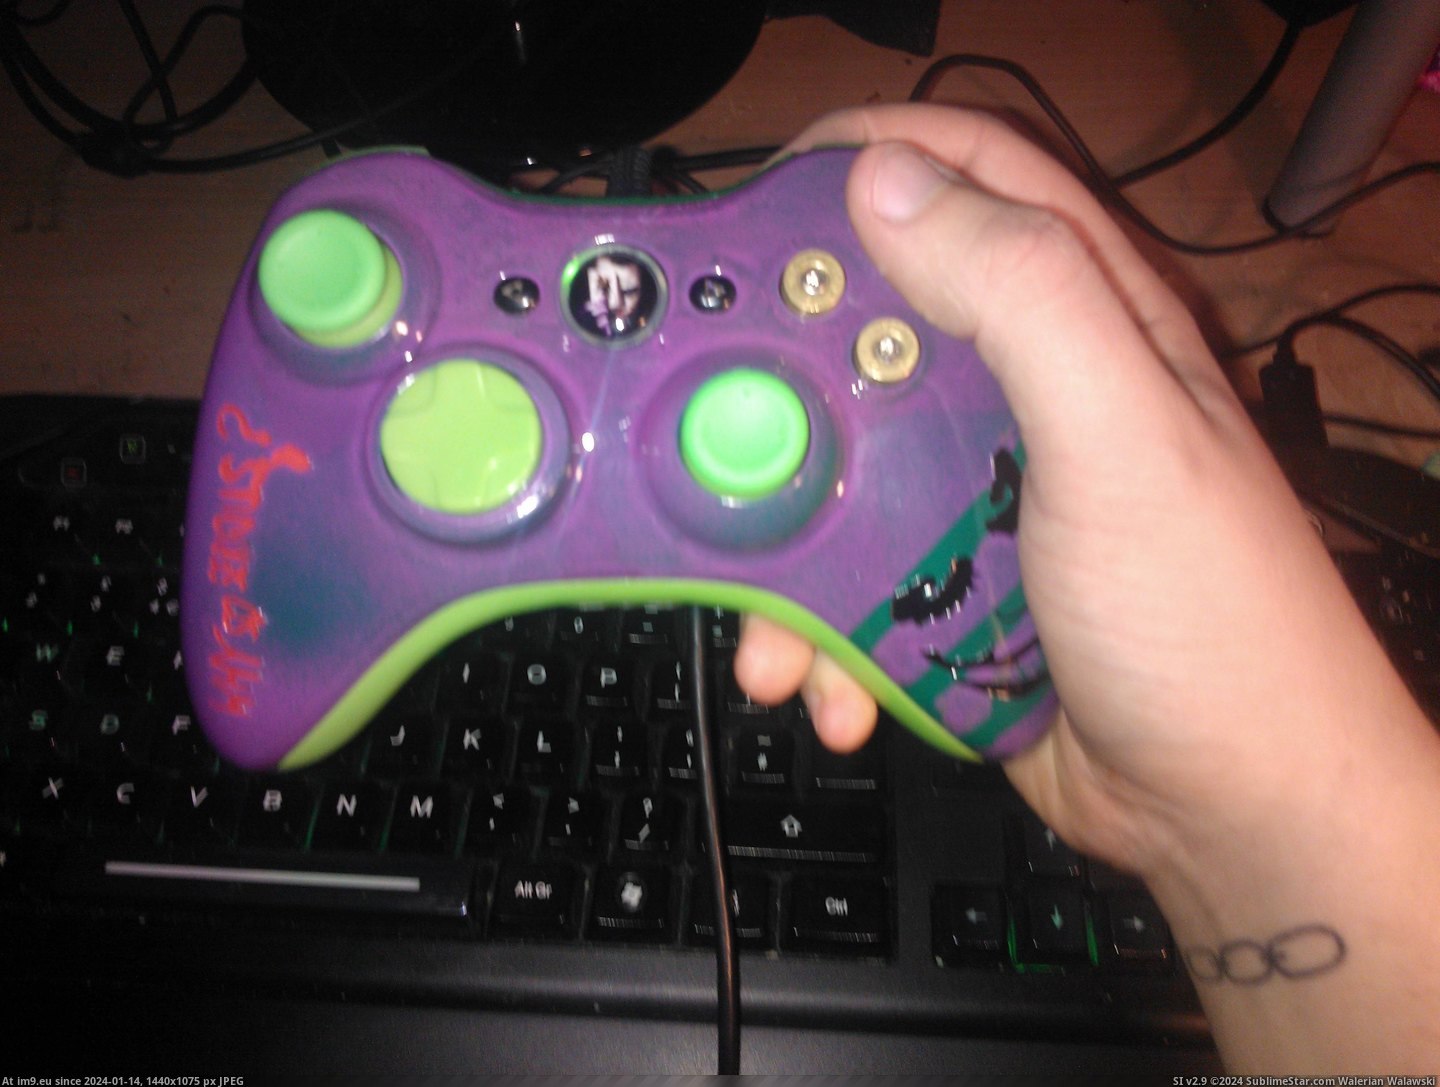 #Album #Gaming #Pretty #Law #Controllers #Brother #Cool #Xbox [Gaming] So my Brother in-law made some pretty cool custom xbox controllers [ALBUM] 8 Pic. (Image of album My r/GAMING favs))